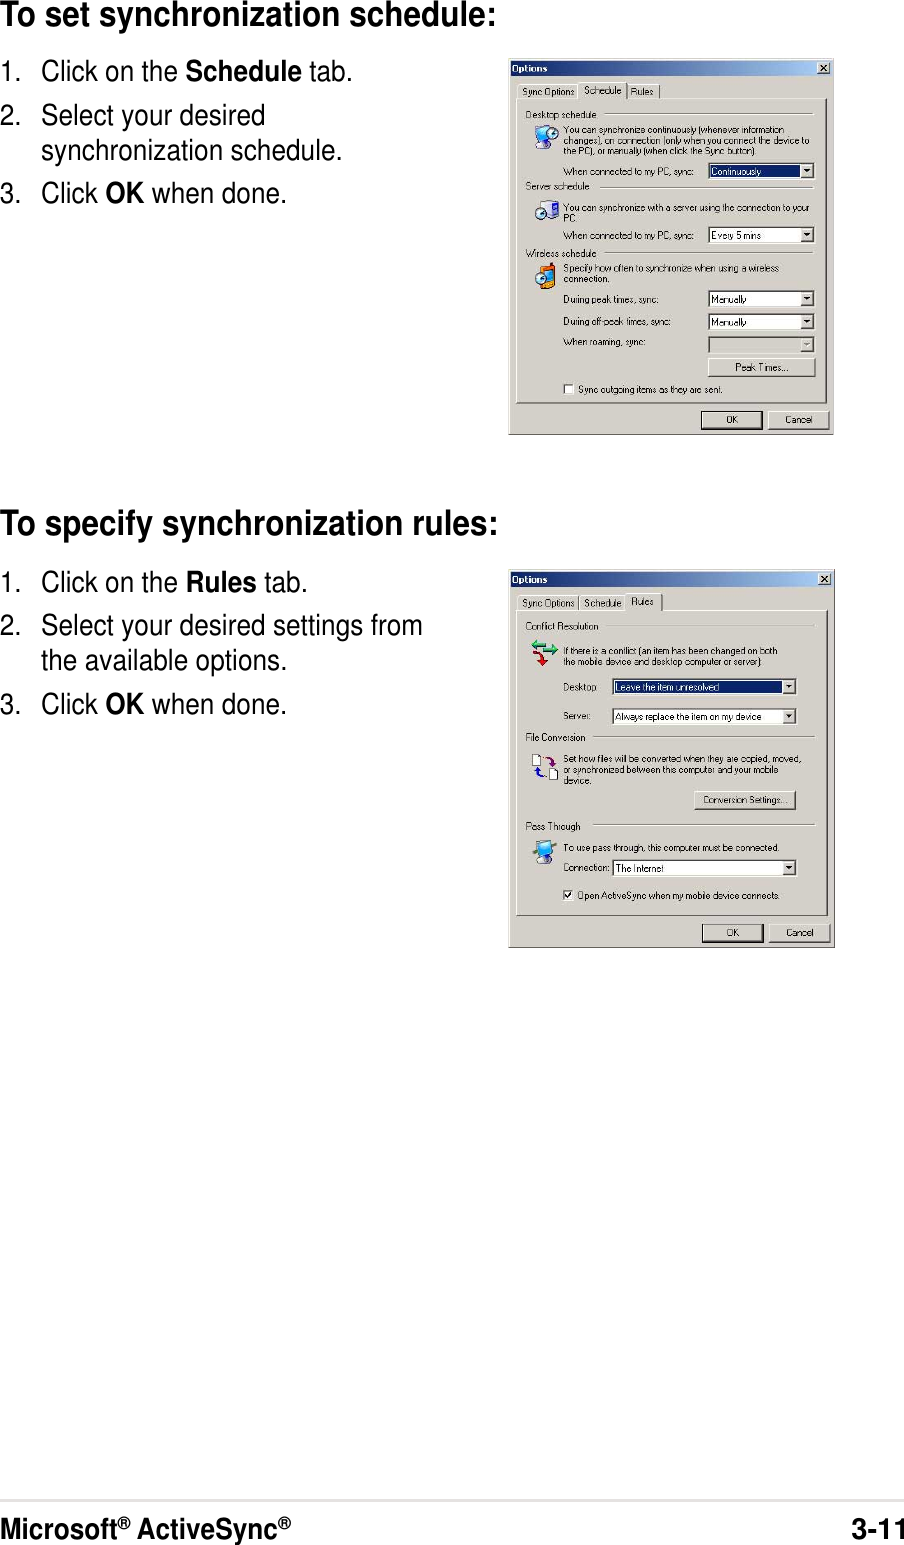 Microsoft® ActiveSync®3-11To set synchronization schedule:1. Click on the Schedule tab.2. Select your desiredsynchronization schedule.3. Click OK when done.To specify synchronization rules:1. Click on the Rules tab.2. Select your desired settings fromthe available options.3. Click OK when done.